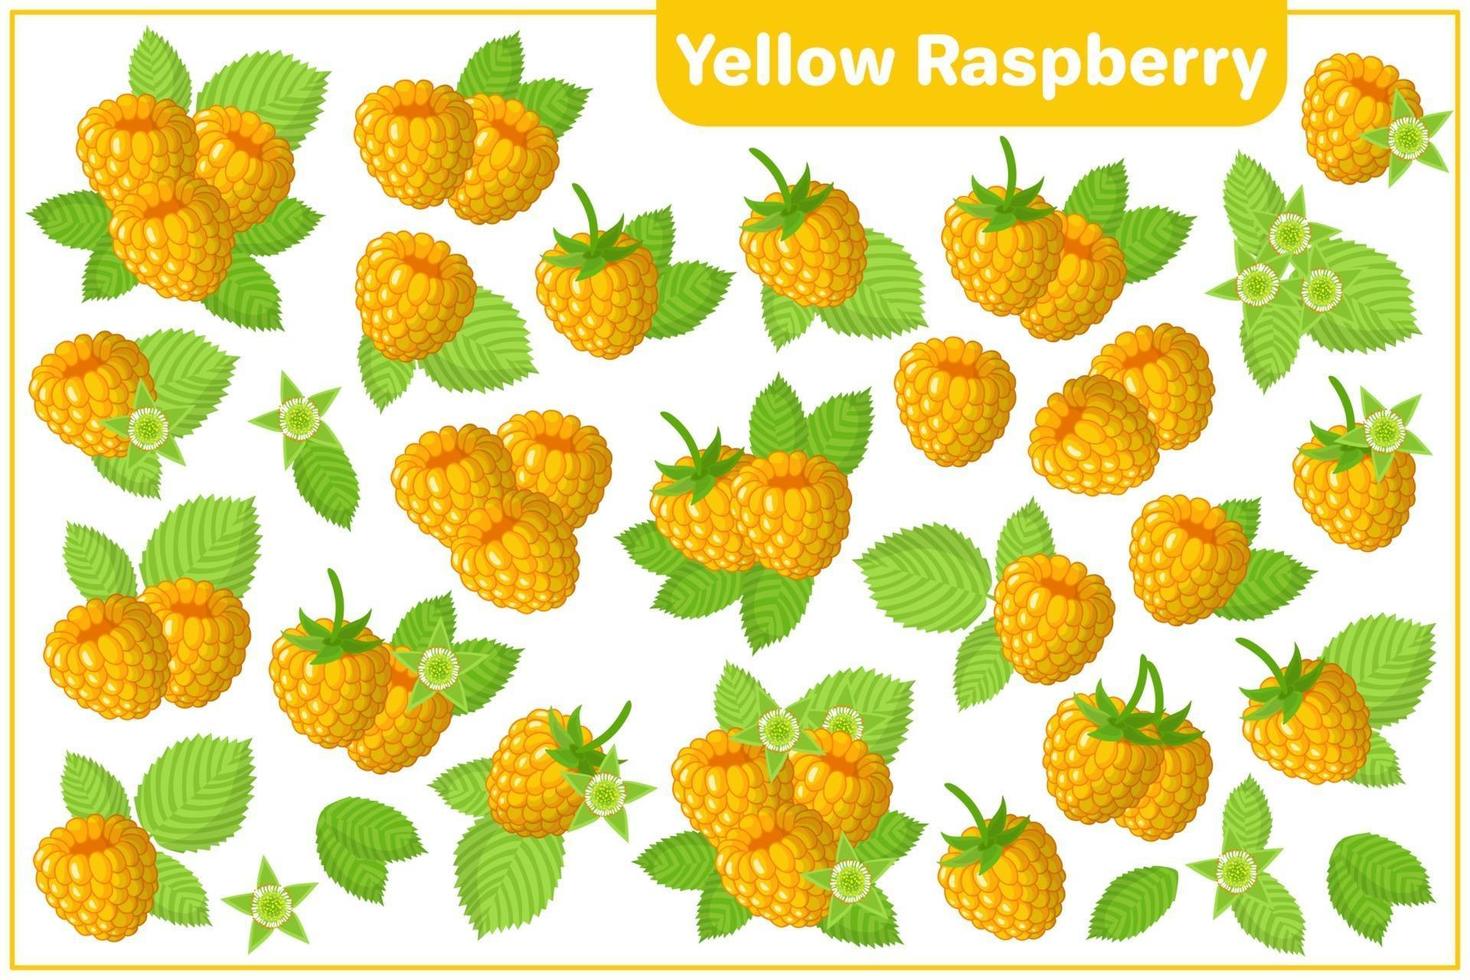 Set of vector cartoon illustrations with Yellow Raspberry exotic fruits isolated on white background